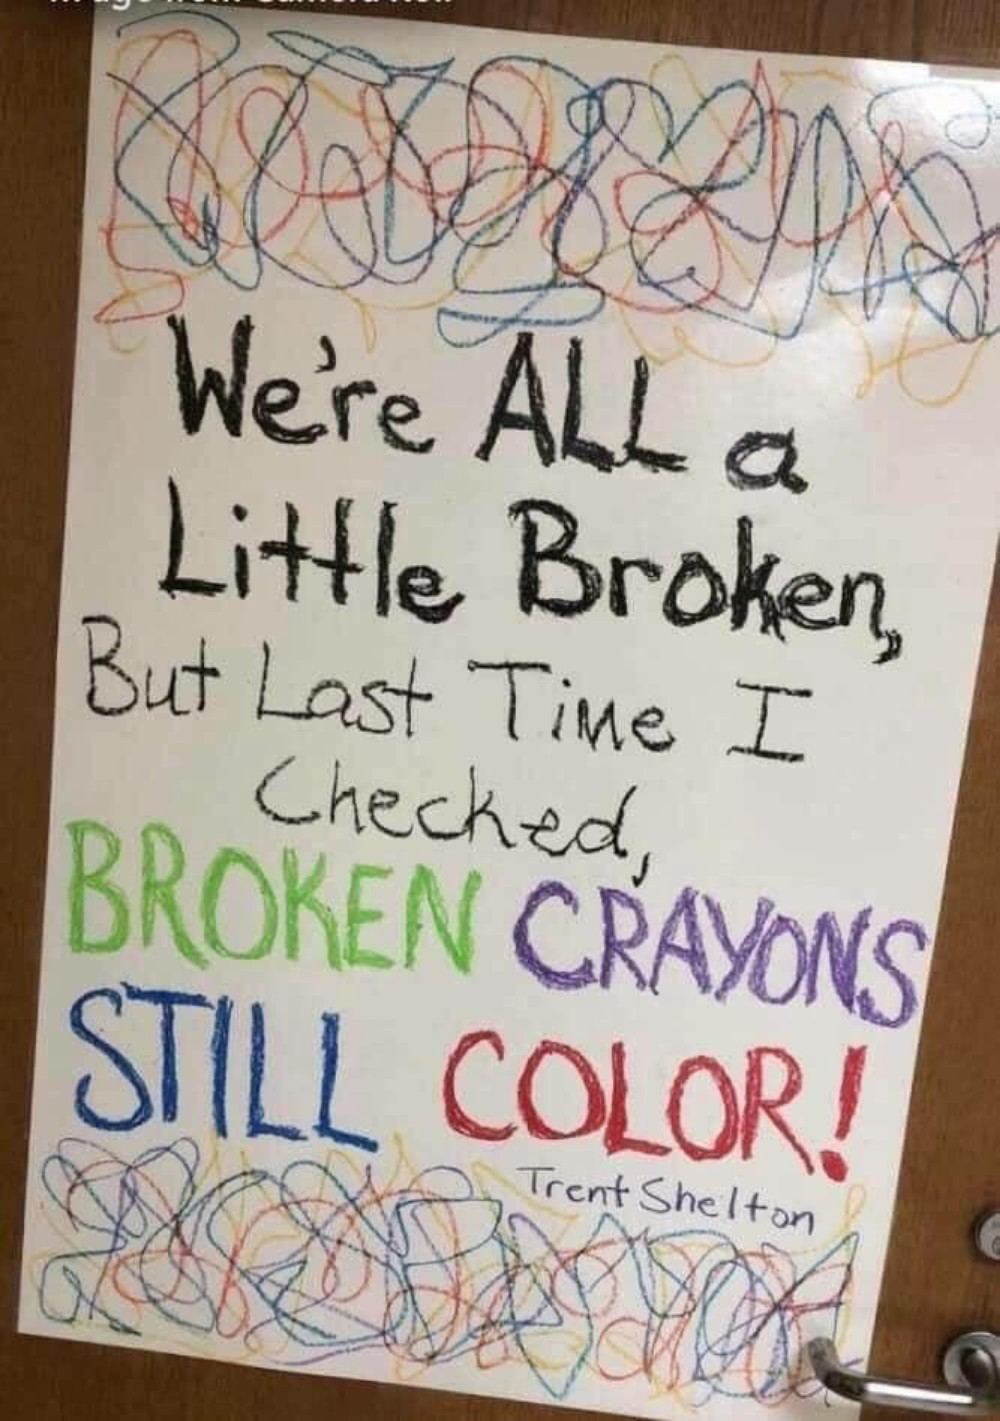 we re all a little broken but last time i checked broken crayons still color - We're Alla Little Broken But Last Time I Checked, Broken Crayons Still Color! Trent Shelton